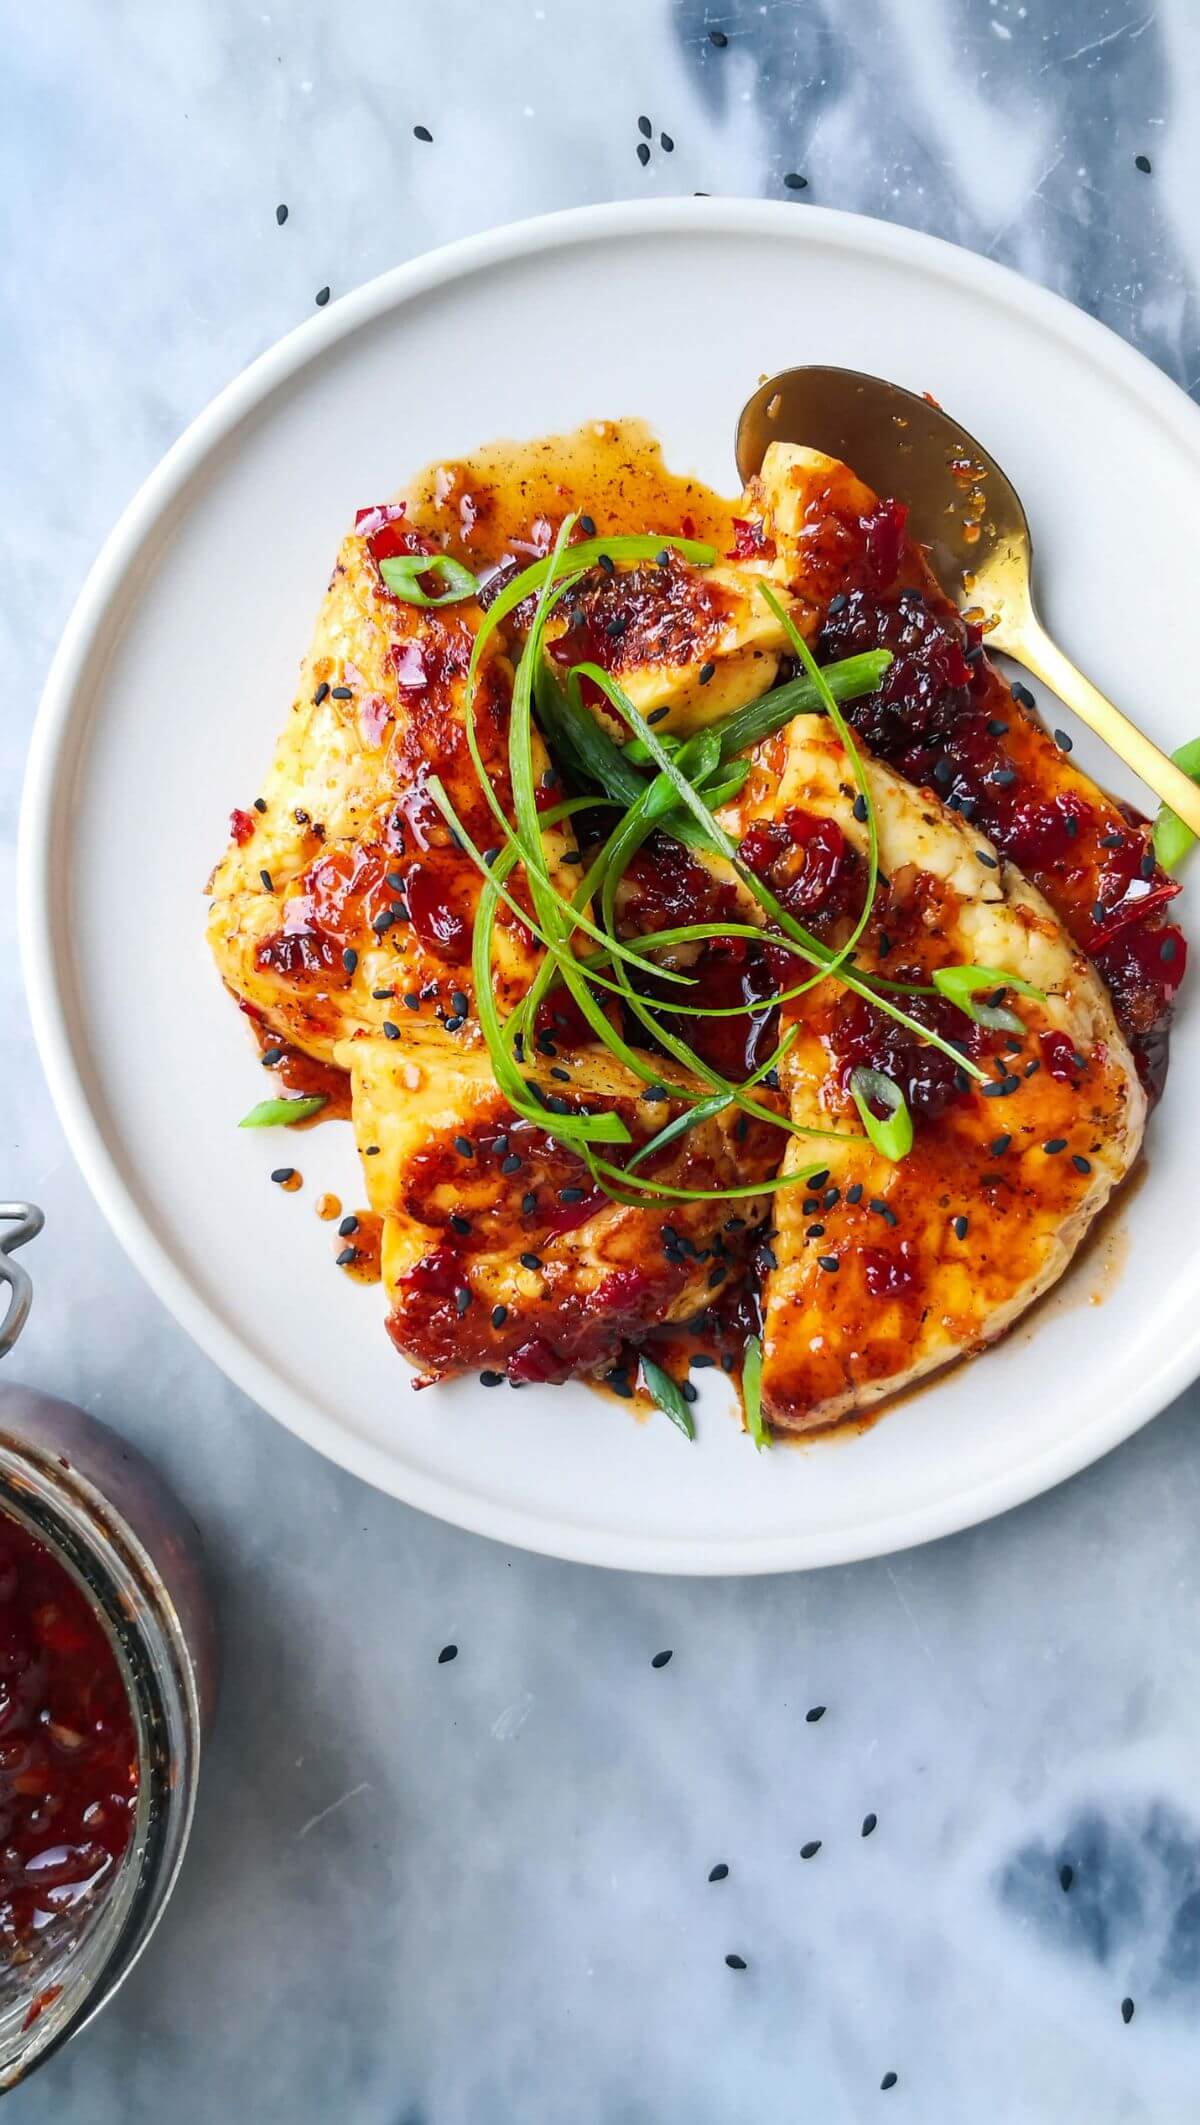 Sweet chilli glazed halloumi on a white plate with a gold spoon.